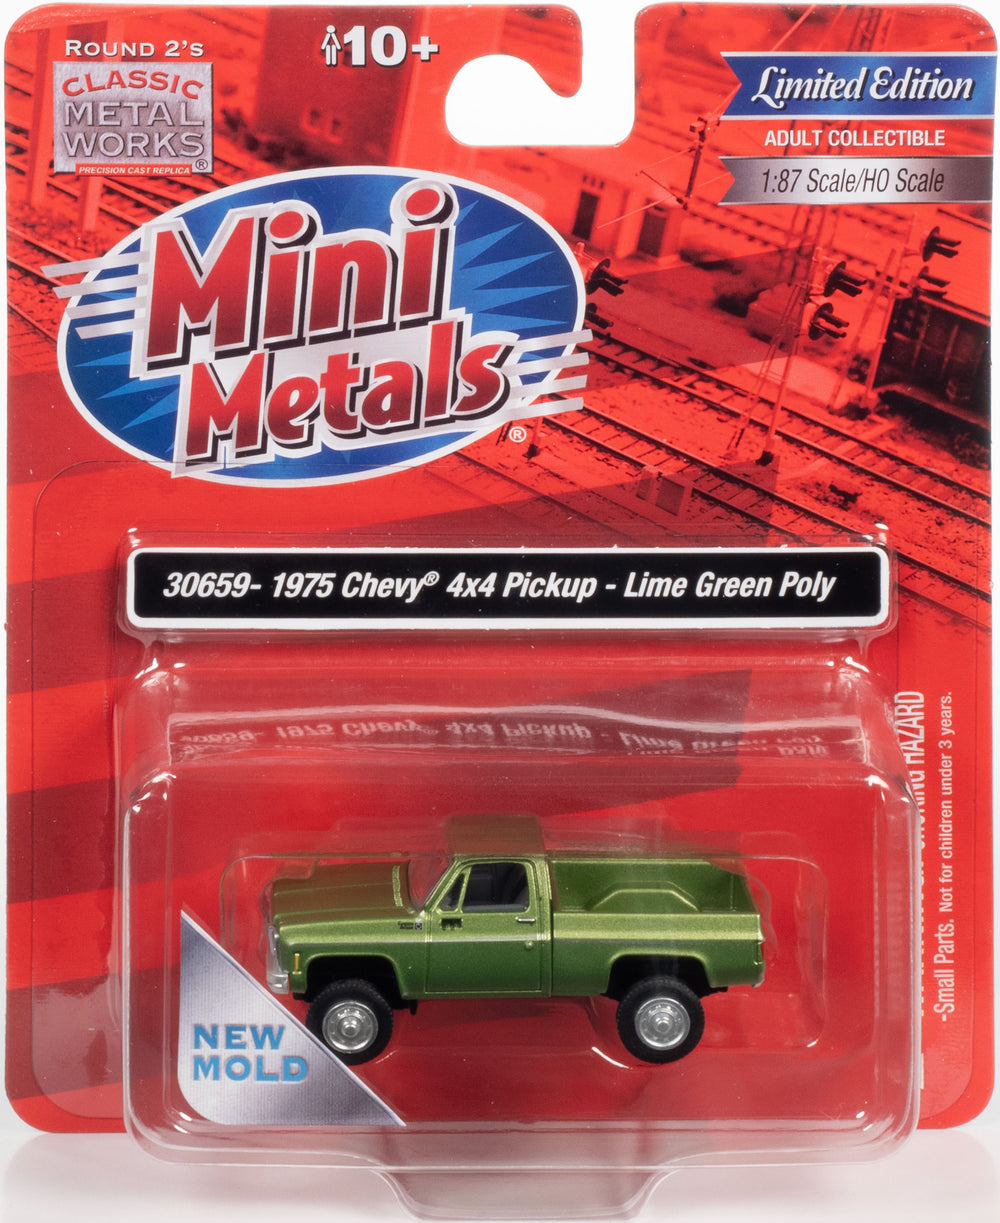 Classic Metal Works 1975 Chevy Pickup 4x4 (Medium Lime Green Poly) 1:87 HO Scale